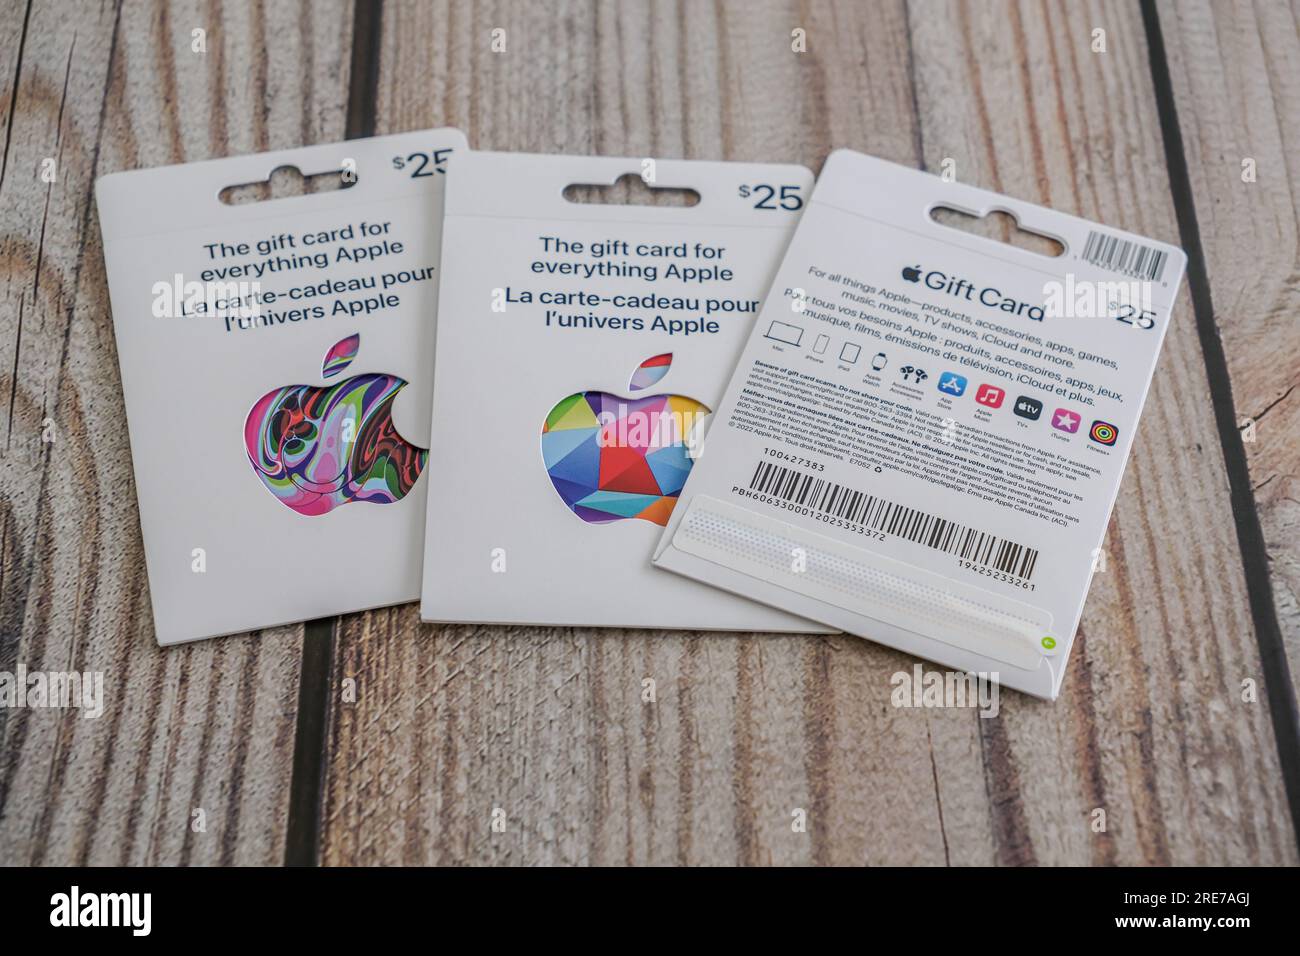 Apple's All-in-One Gift Card Now Available In Canada And